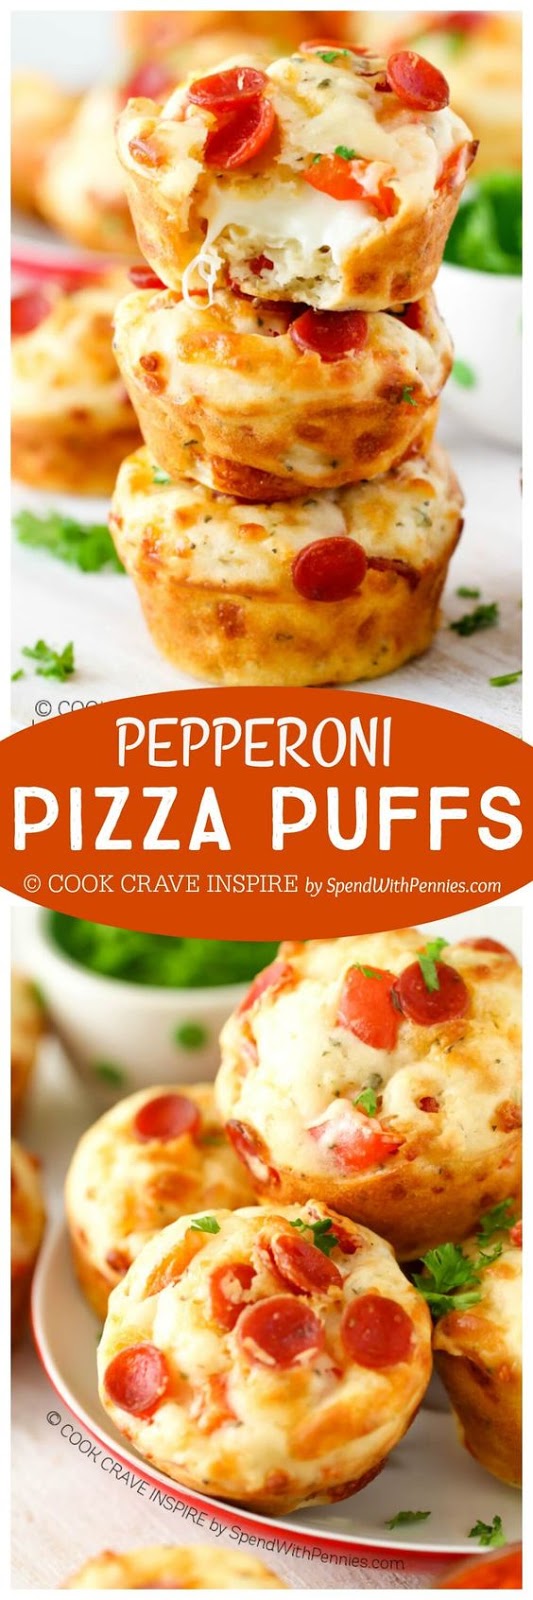 EASY CHEESY PEPPERONI PIZZA PUFFS